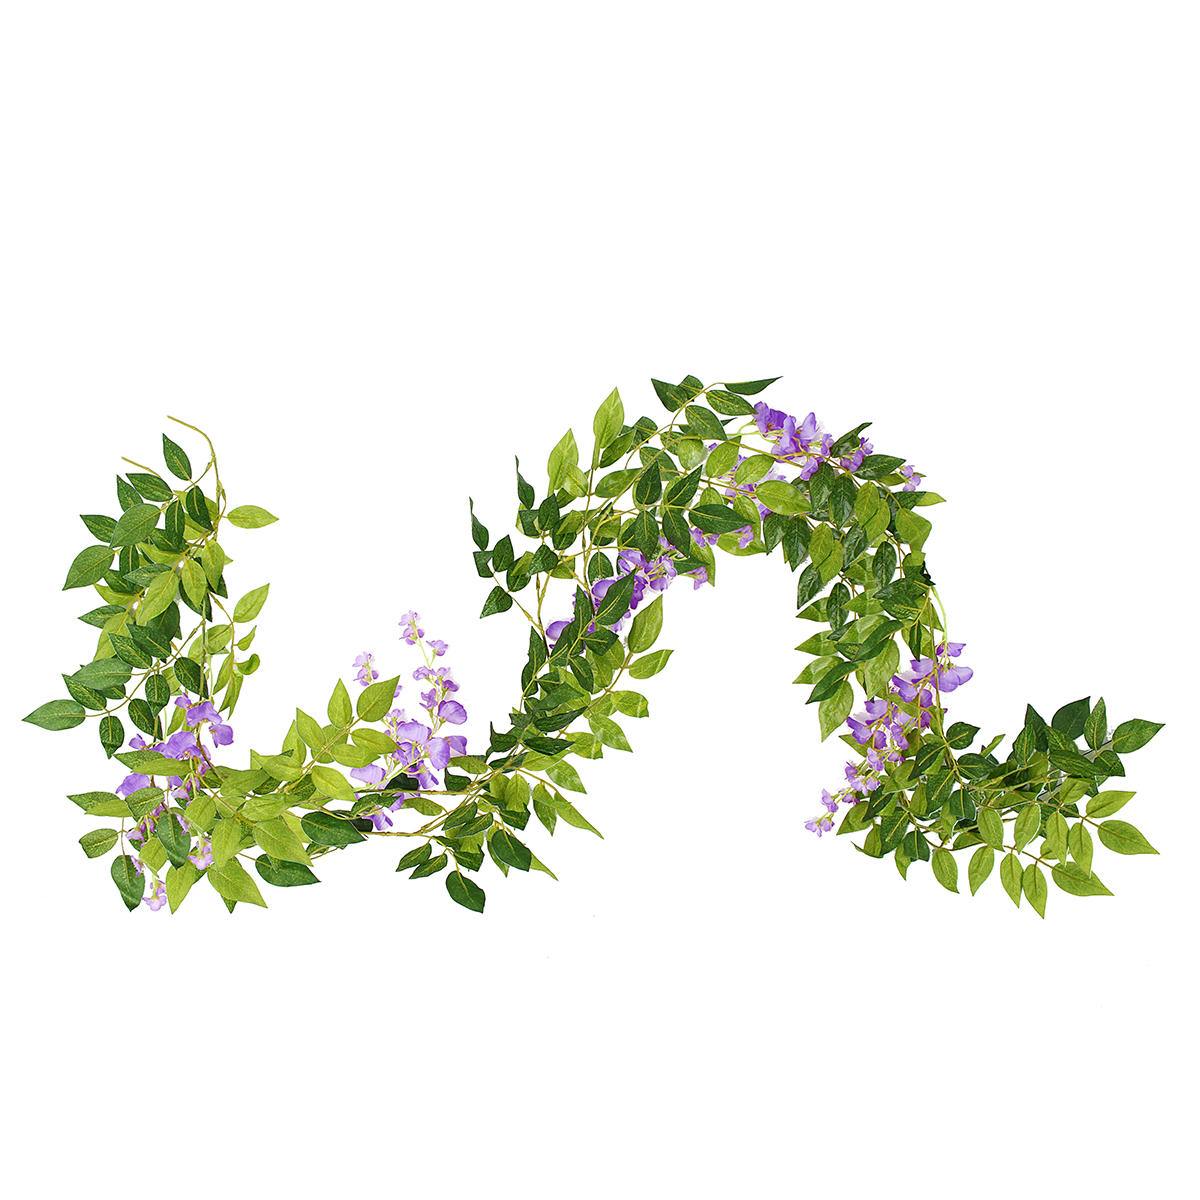 Wisteria-Garland-Artificial-Flowers-Bunch-Wedding-Home-Hanging-Ivy-Decorations-2m-1496339-9